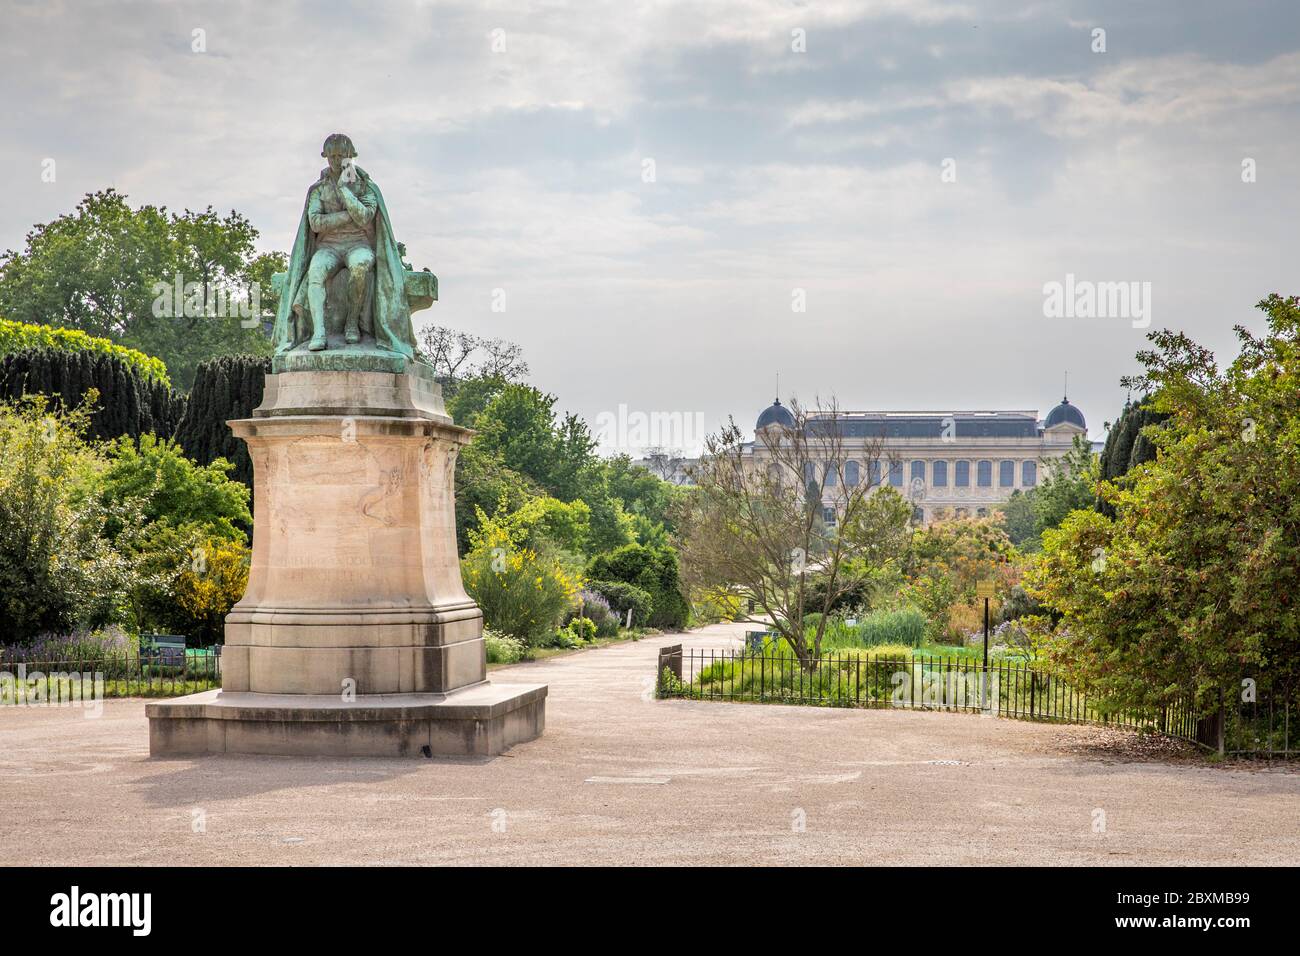 Paris, France - April 25, 2020: The Jardin des plantes (french for garden of the plants) is the main botanical garden in France. Located in Paris, it Stock Photo